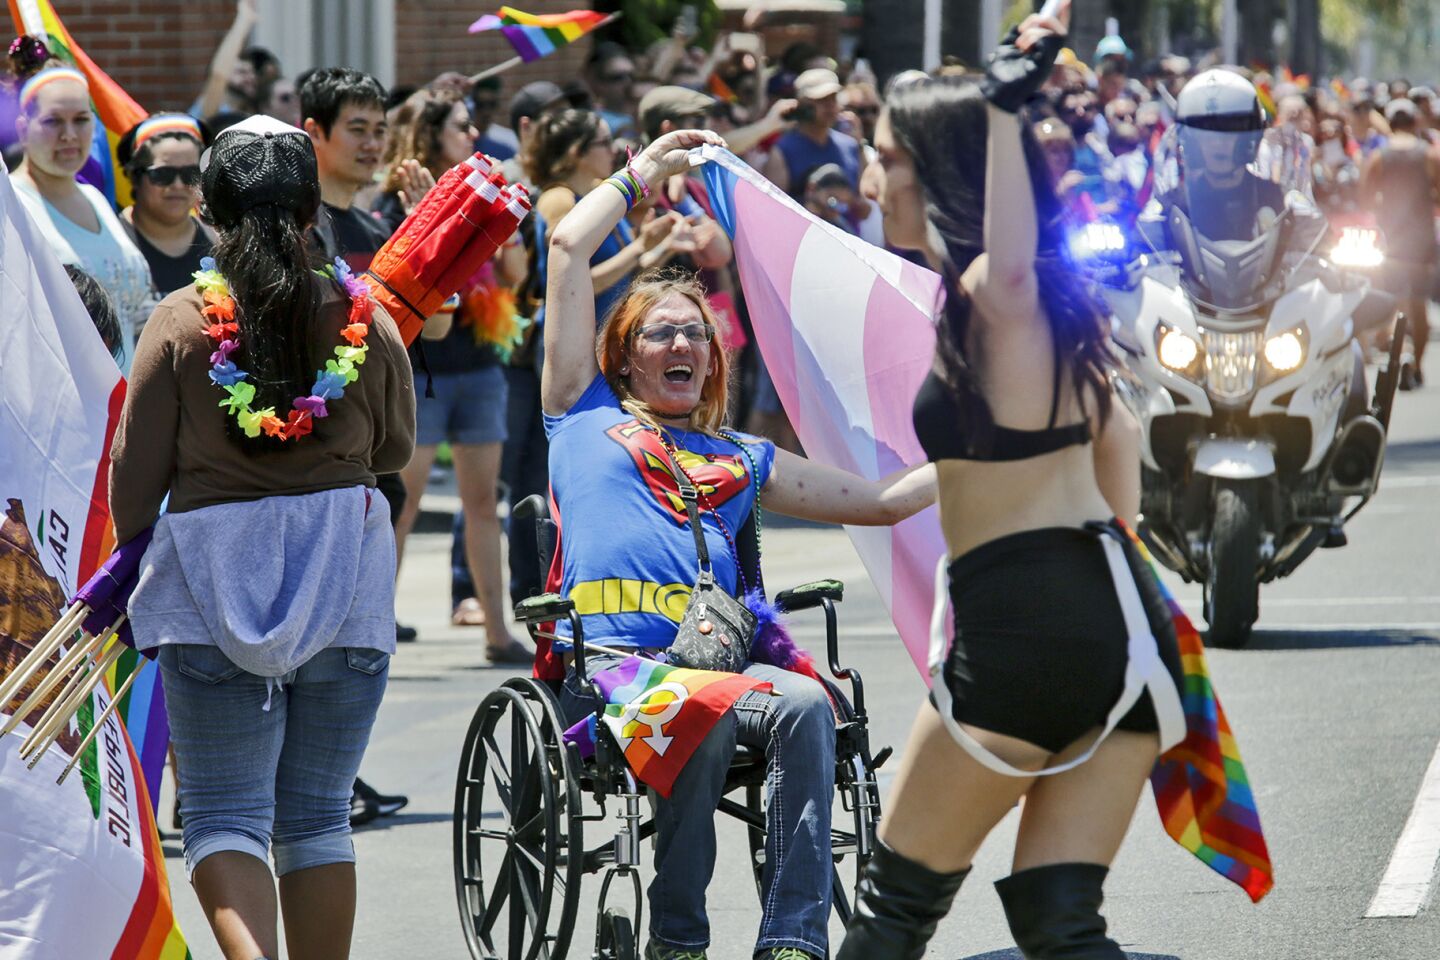 Post Orlando, . gay parade draws huge support and shares message of  unity - Los Angeles Times